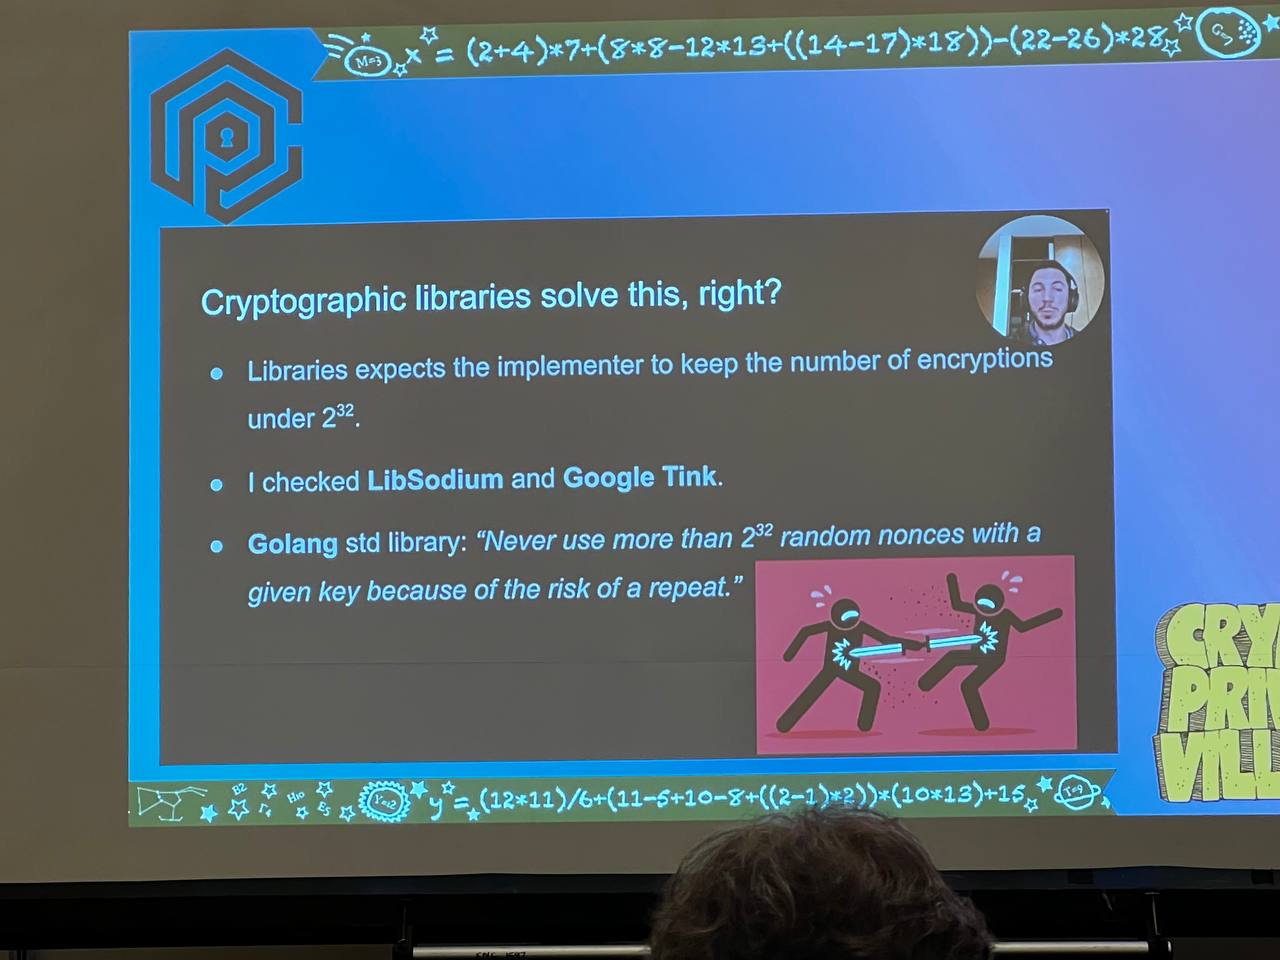 Cryptographic libraries solve this, right? Libraries expect the implementor to keep encryptions below the upper threshold of two to the power of 32. LibSodium and Google Tink do not track or enforce this. Never use more than 2 to the 32 random nonces with a given key because of the risk of a repeat.